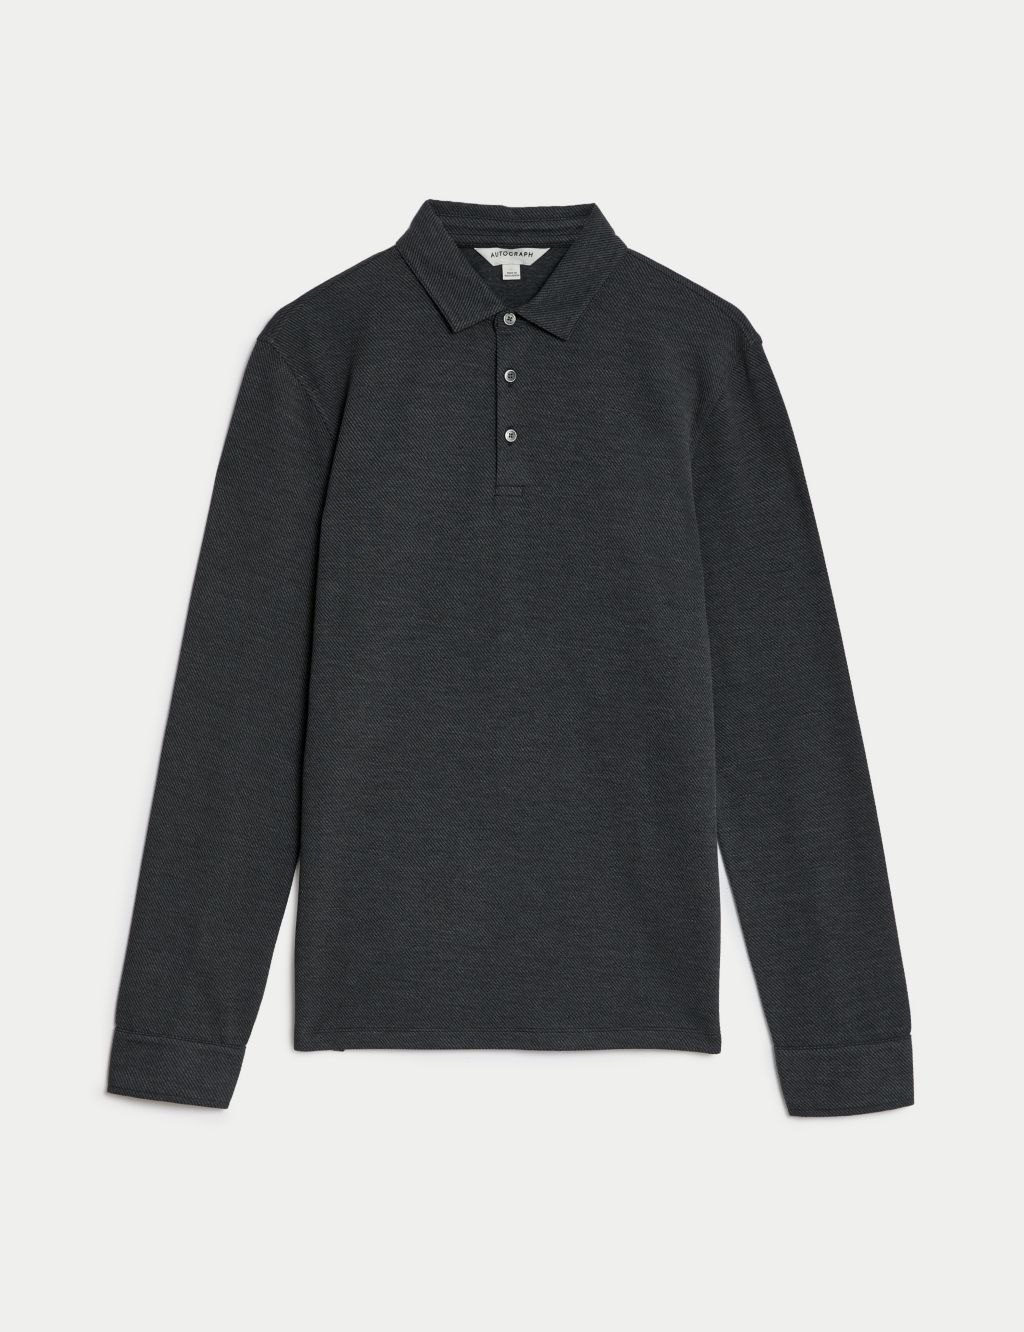 Cotton Rich Textured Long Sleeve Polo Shirt image 2